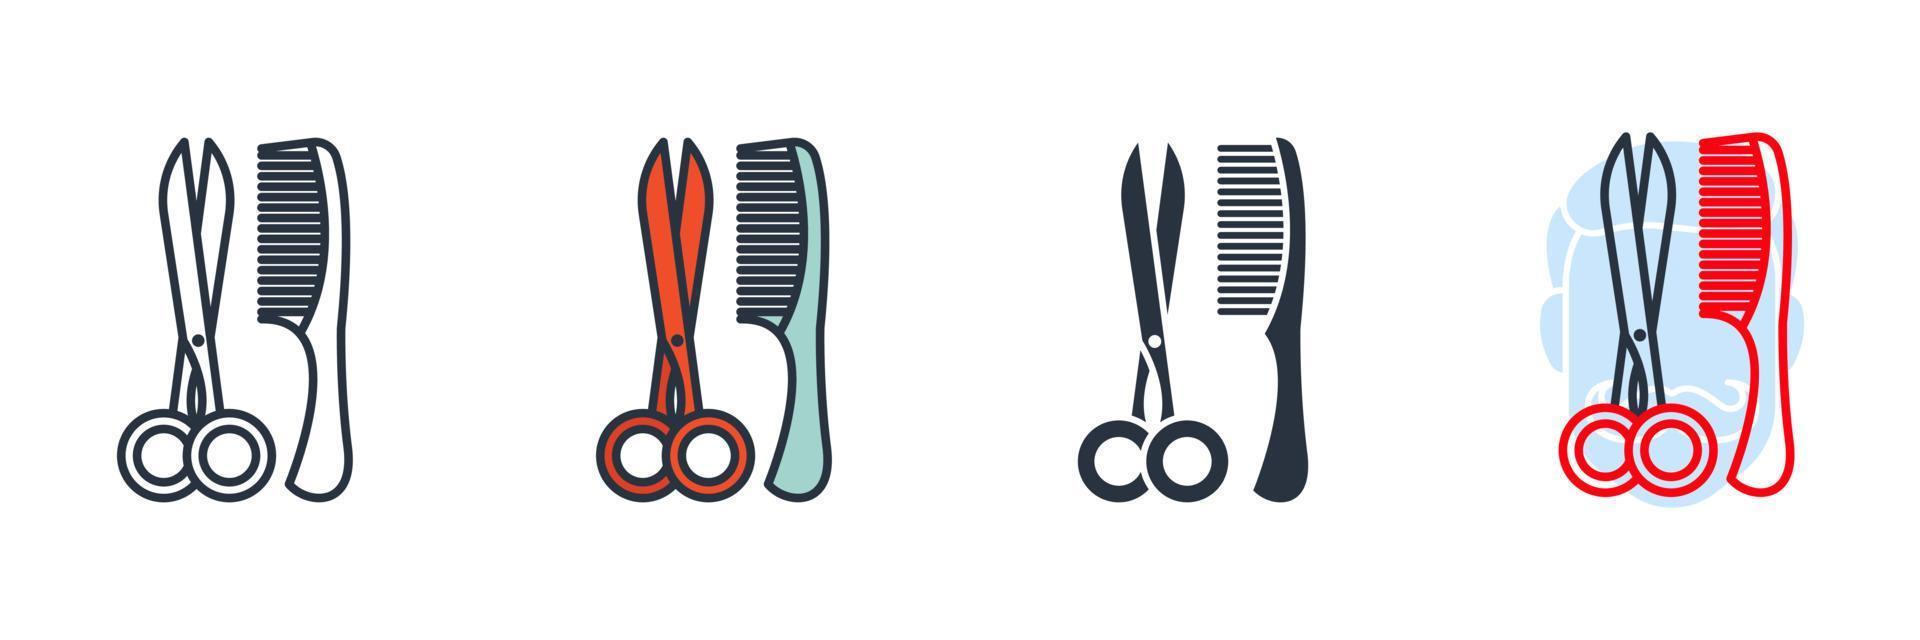 scissor and comb icon logo vector illustration. hair salon symbol template for graphic and web design collection